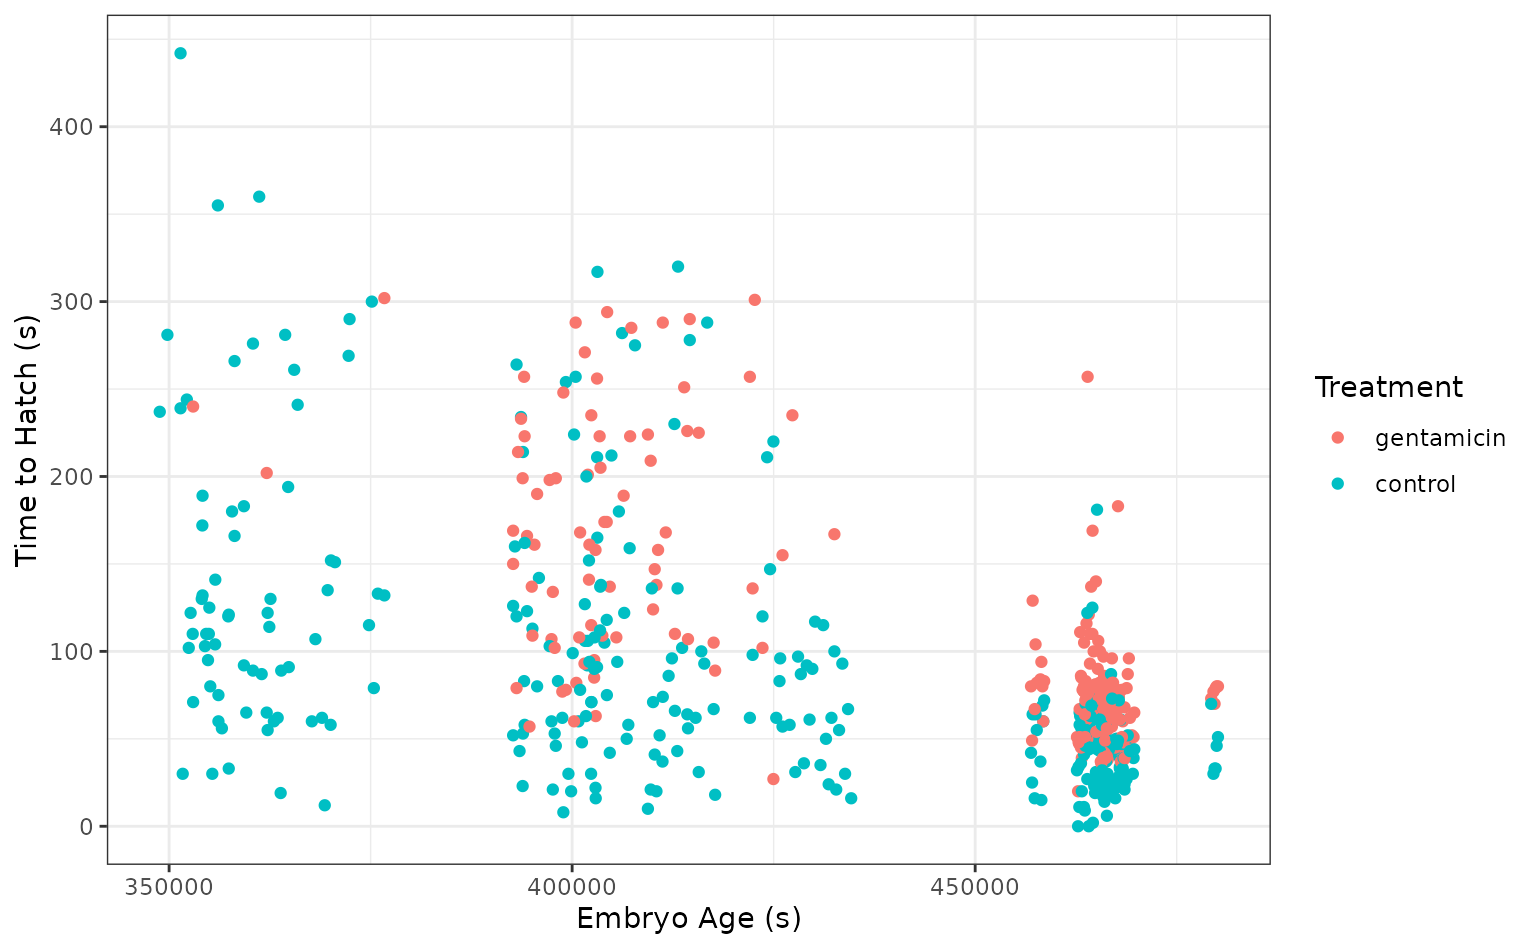 A ggplot scatterplot with embryo age in seconds on the x axis, time to hatch on the y axis, and points colored by treatment. The ages range from 350,000 to 500,000 seconds, while the times to hatch range from 0 to 450 seconds. There are two treatments—control and gentamicin—and the time to hatch is generally larger for the gentamicin group. The embryo ages are generally distributed in three clouds, where the older embryos tend to hatch more quickly after stimulus than the younger ones.